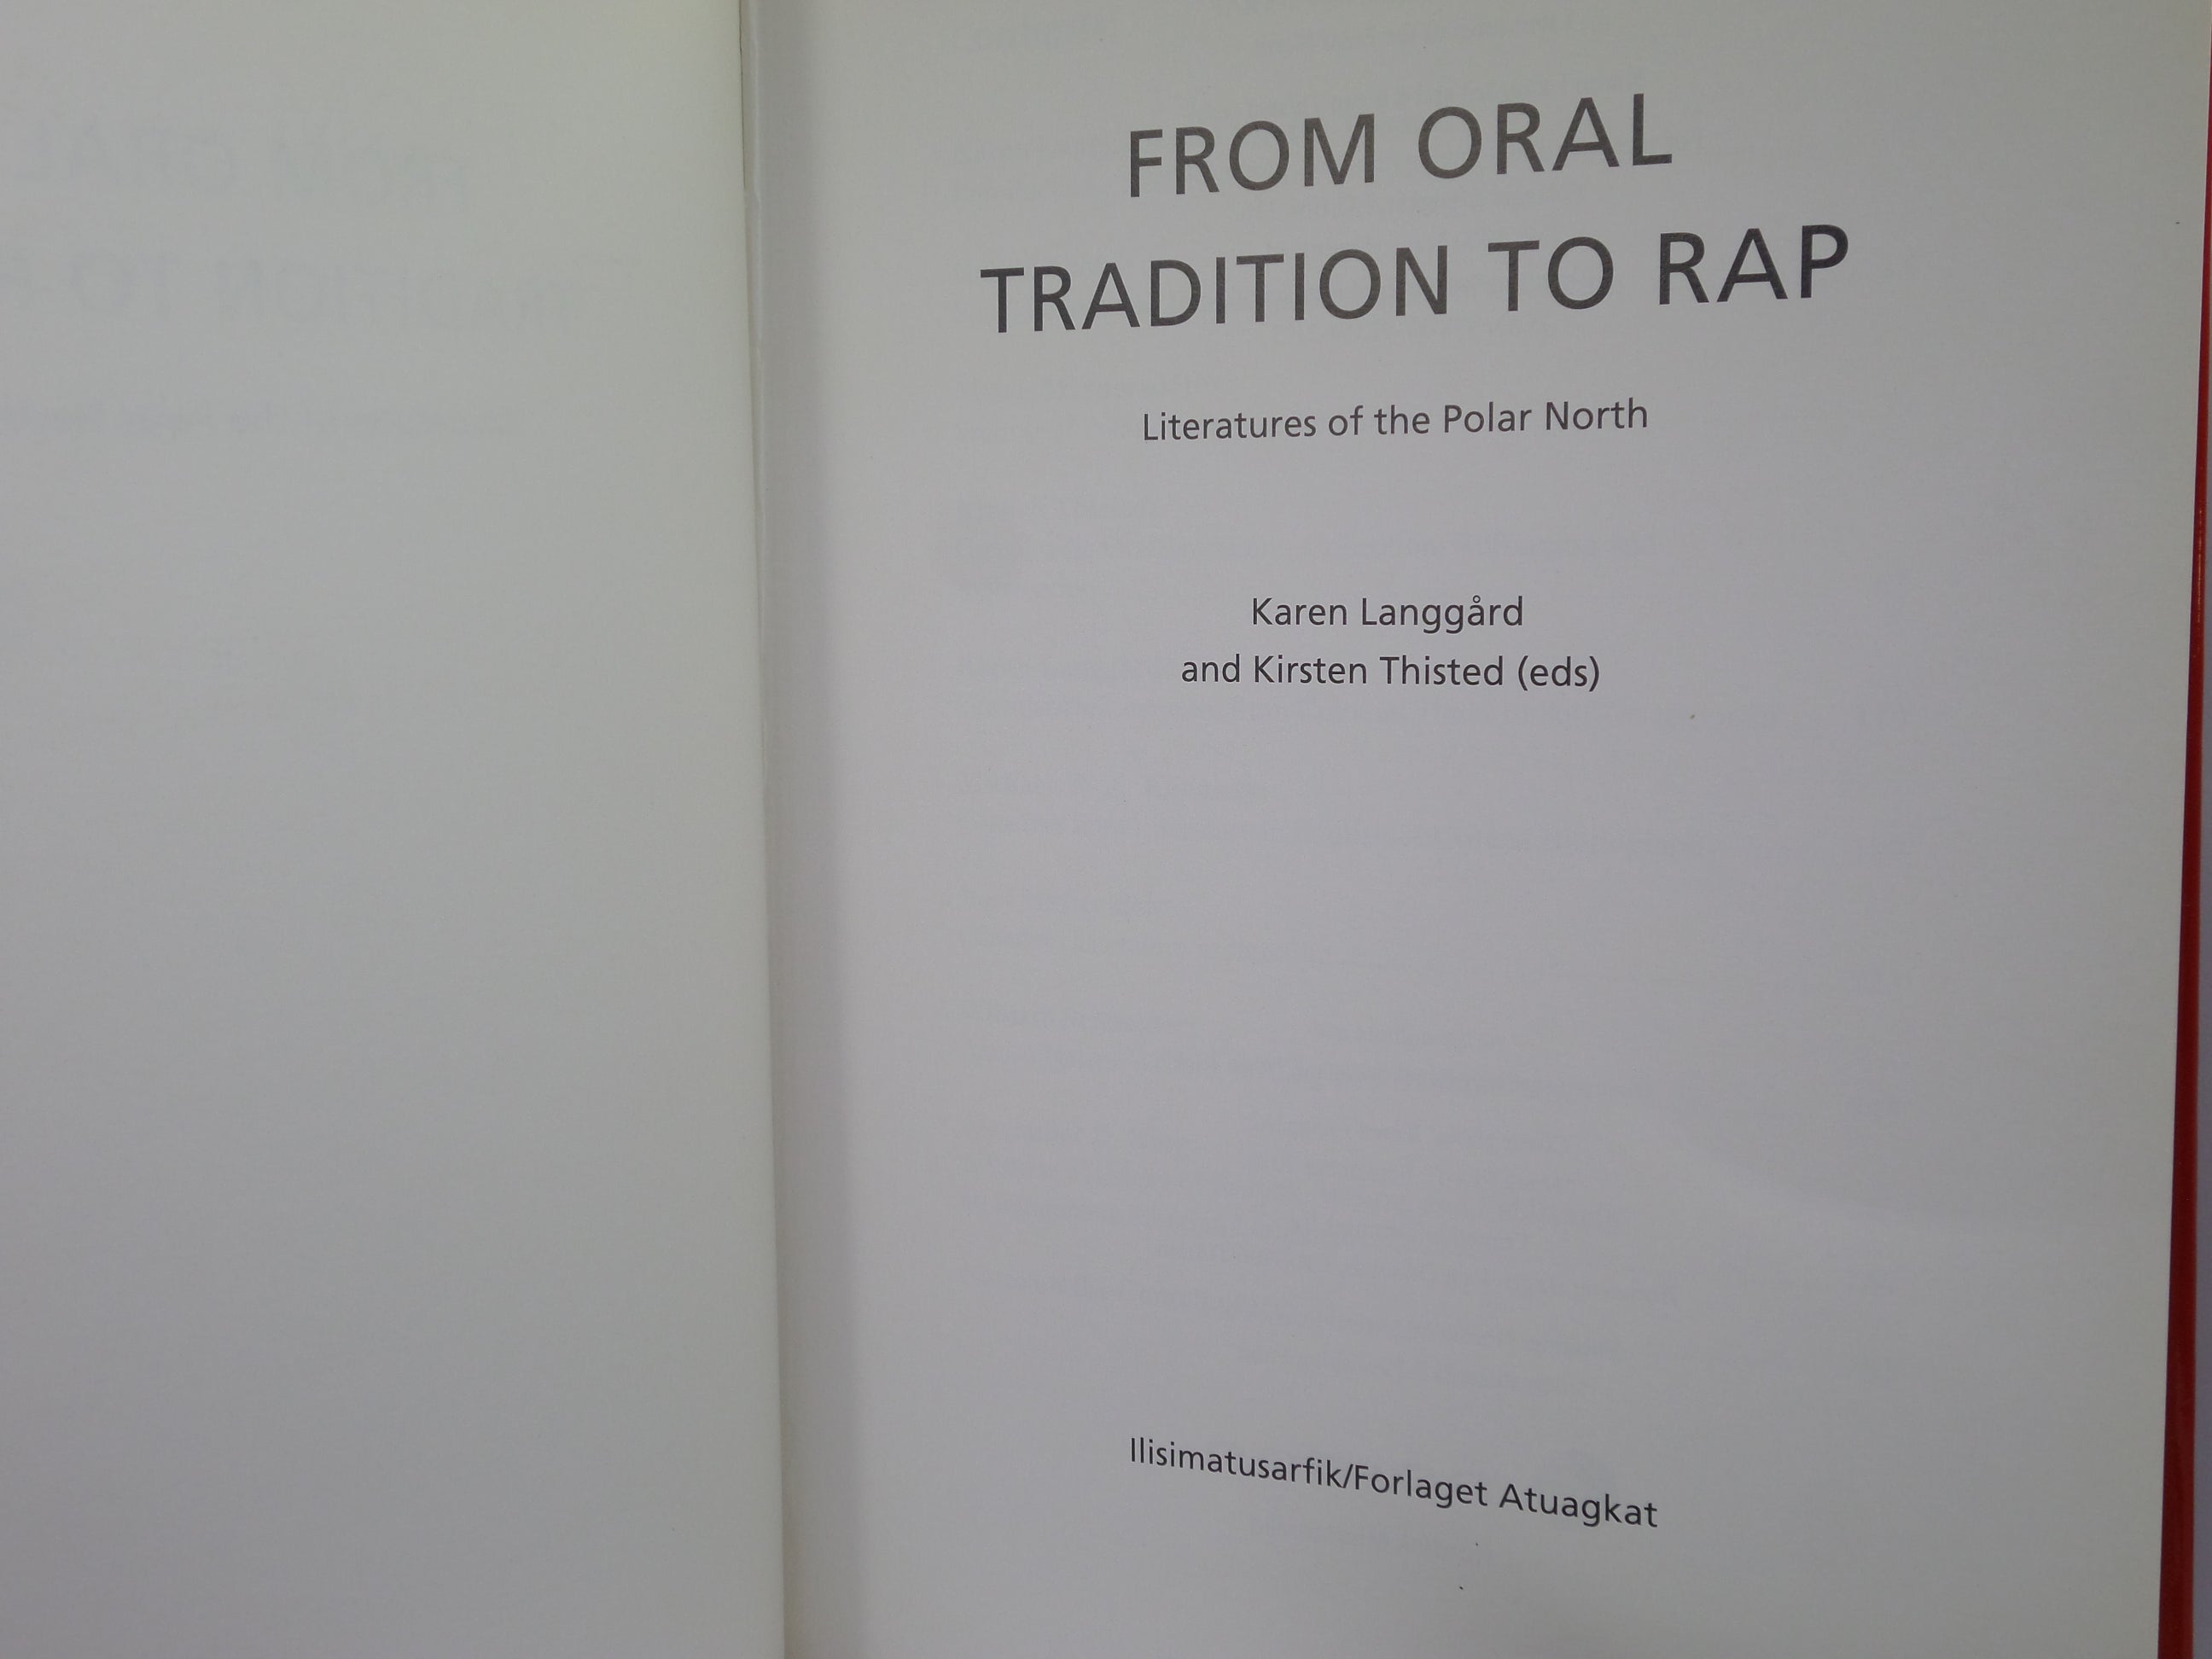 FROM ORAL TRADITION TO RAP: LITERATURES OF THE POLAR NORTH 2011 HARDCOVER